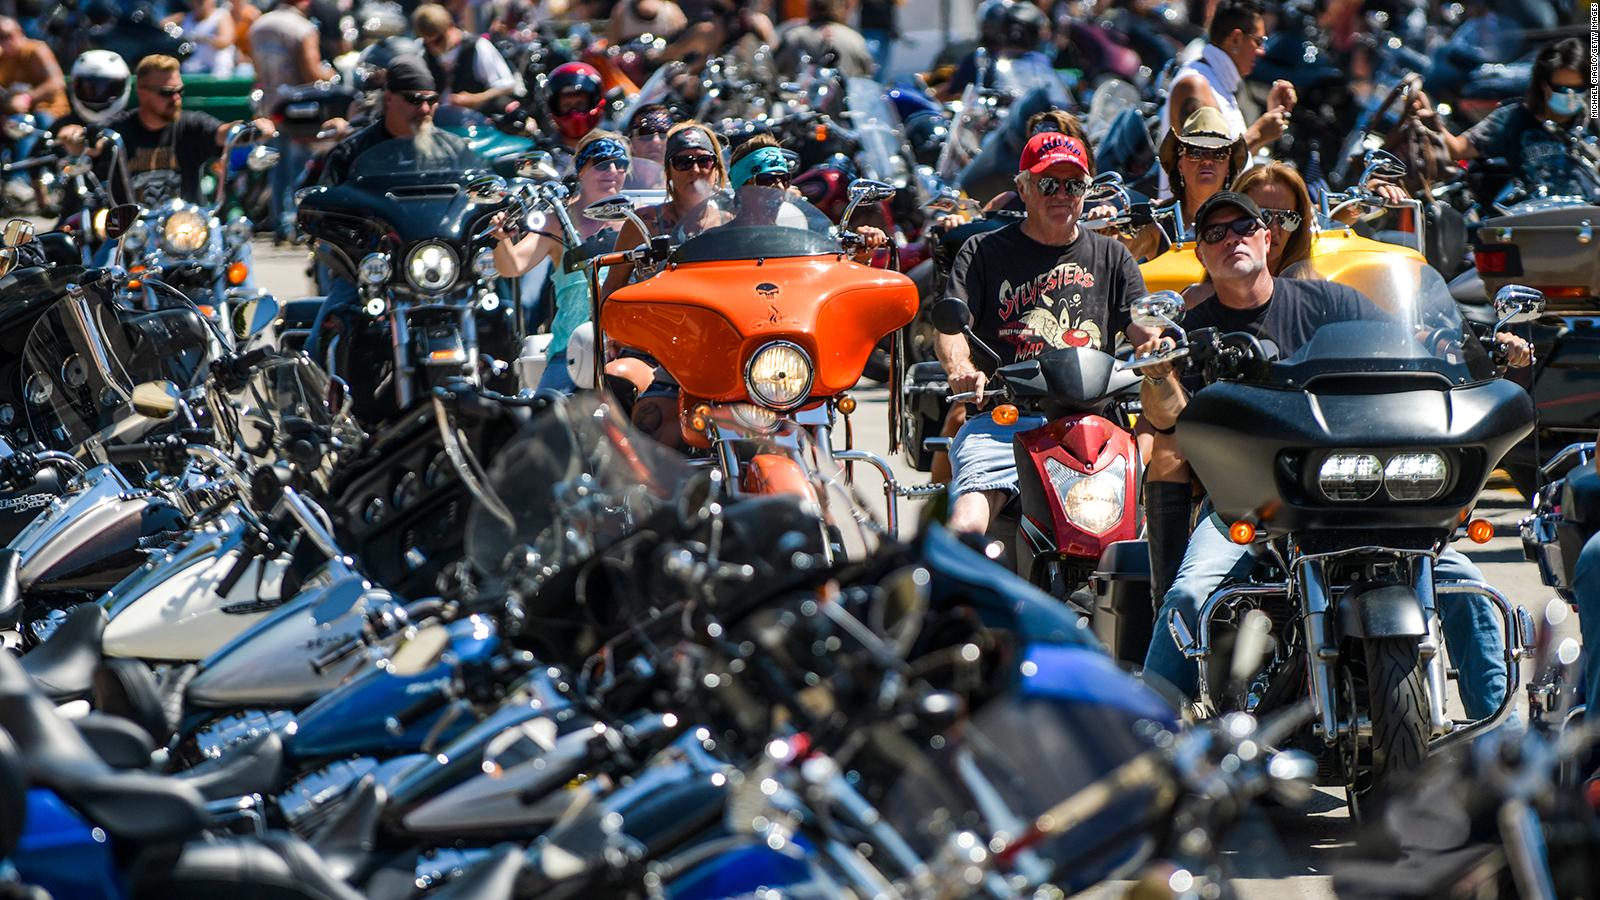 Riders begin to gather in South Dakota for 80th Sturgis Motorcycle